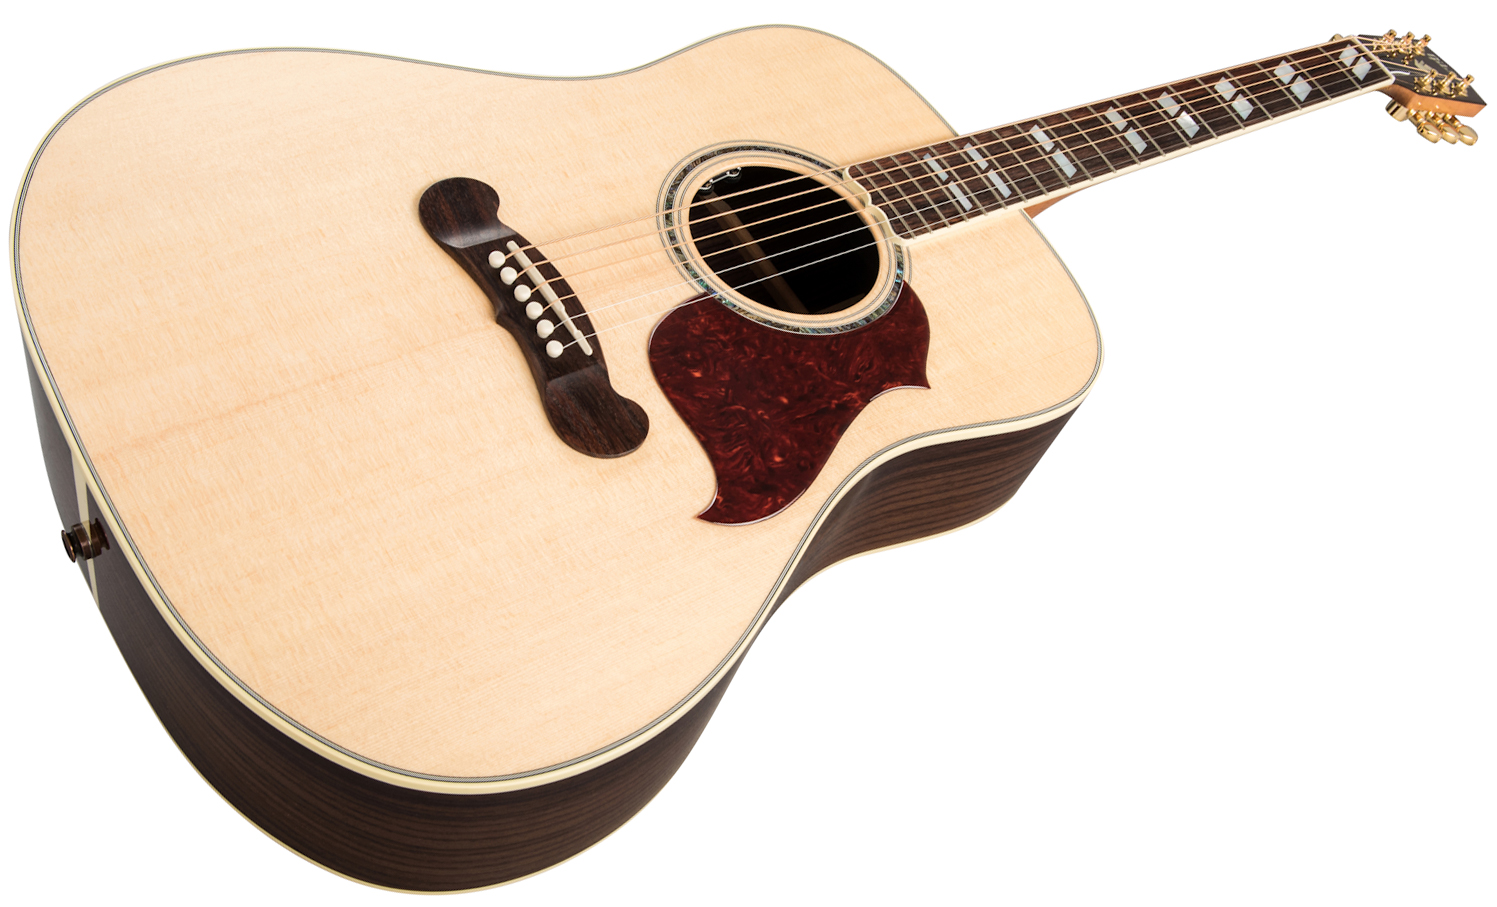 Gibson Songwriter Standard Rosewood 2019 Epicea Palissandre Rw - Antique Natural - Guitarra electro acustica - Variation 3